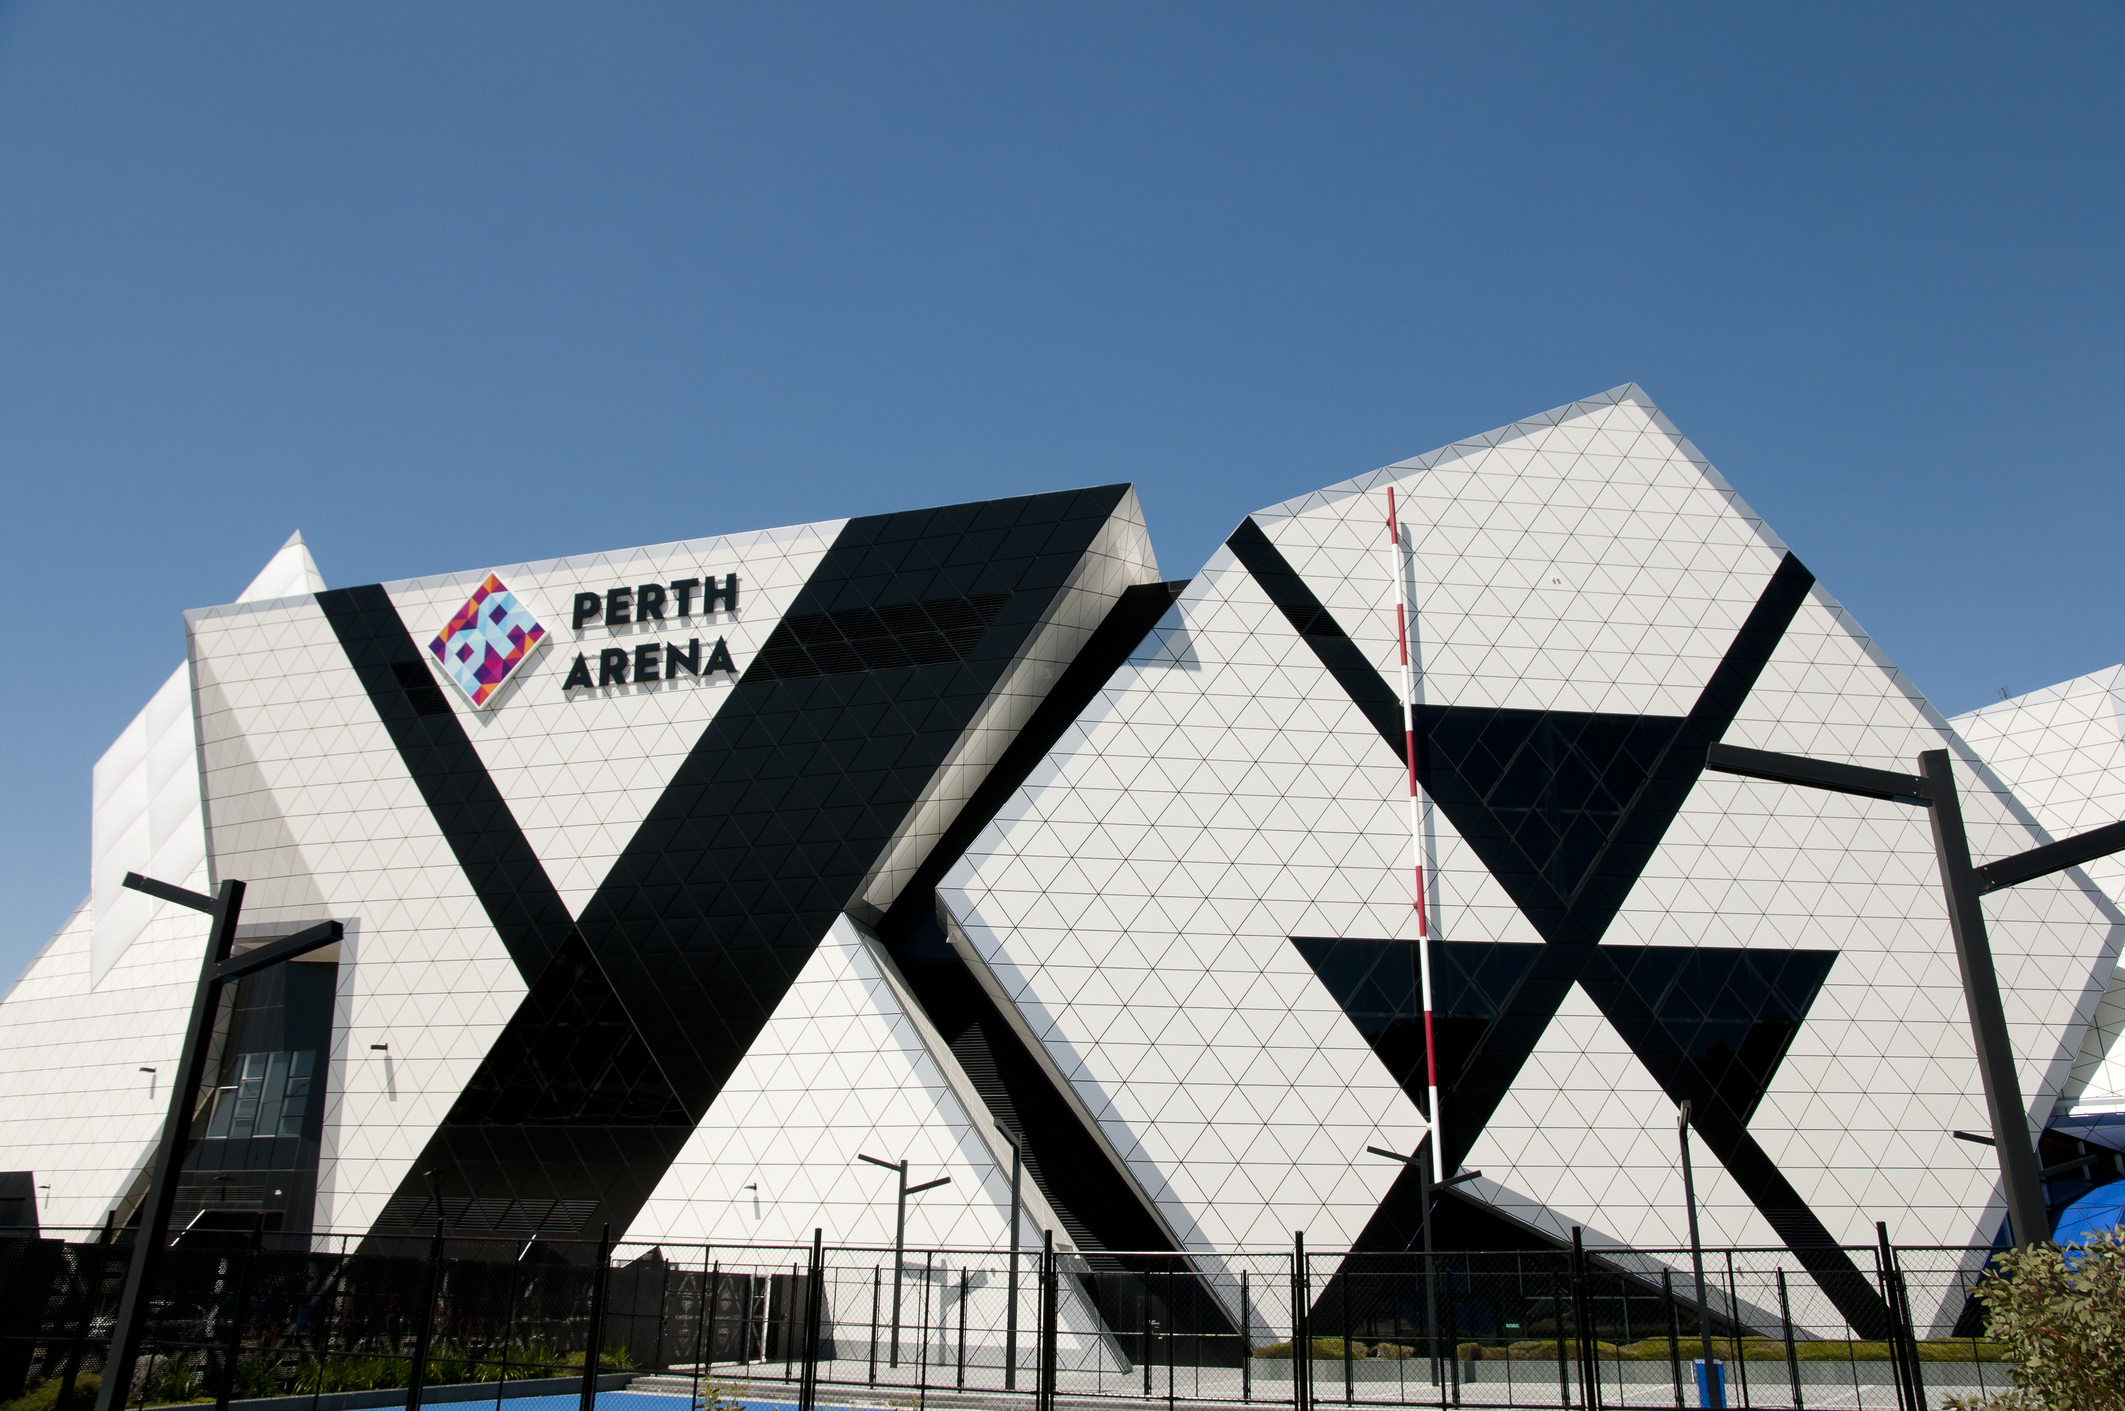 Loadsensing ensures safer access to Perth Arena